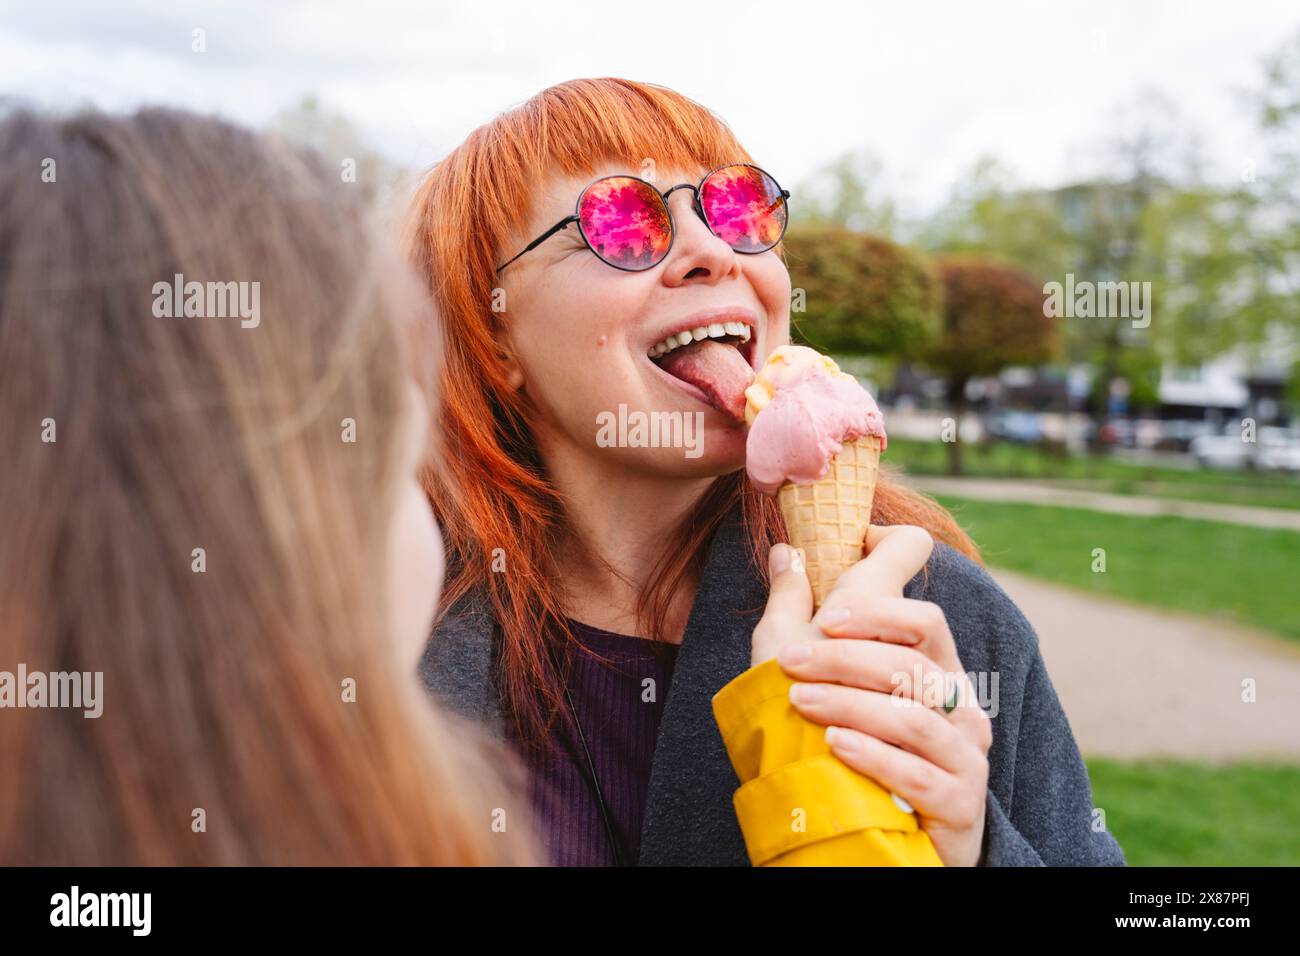 Girl feeding ice cream to mother at park Stock Photo